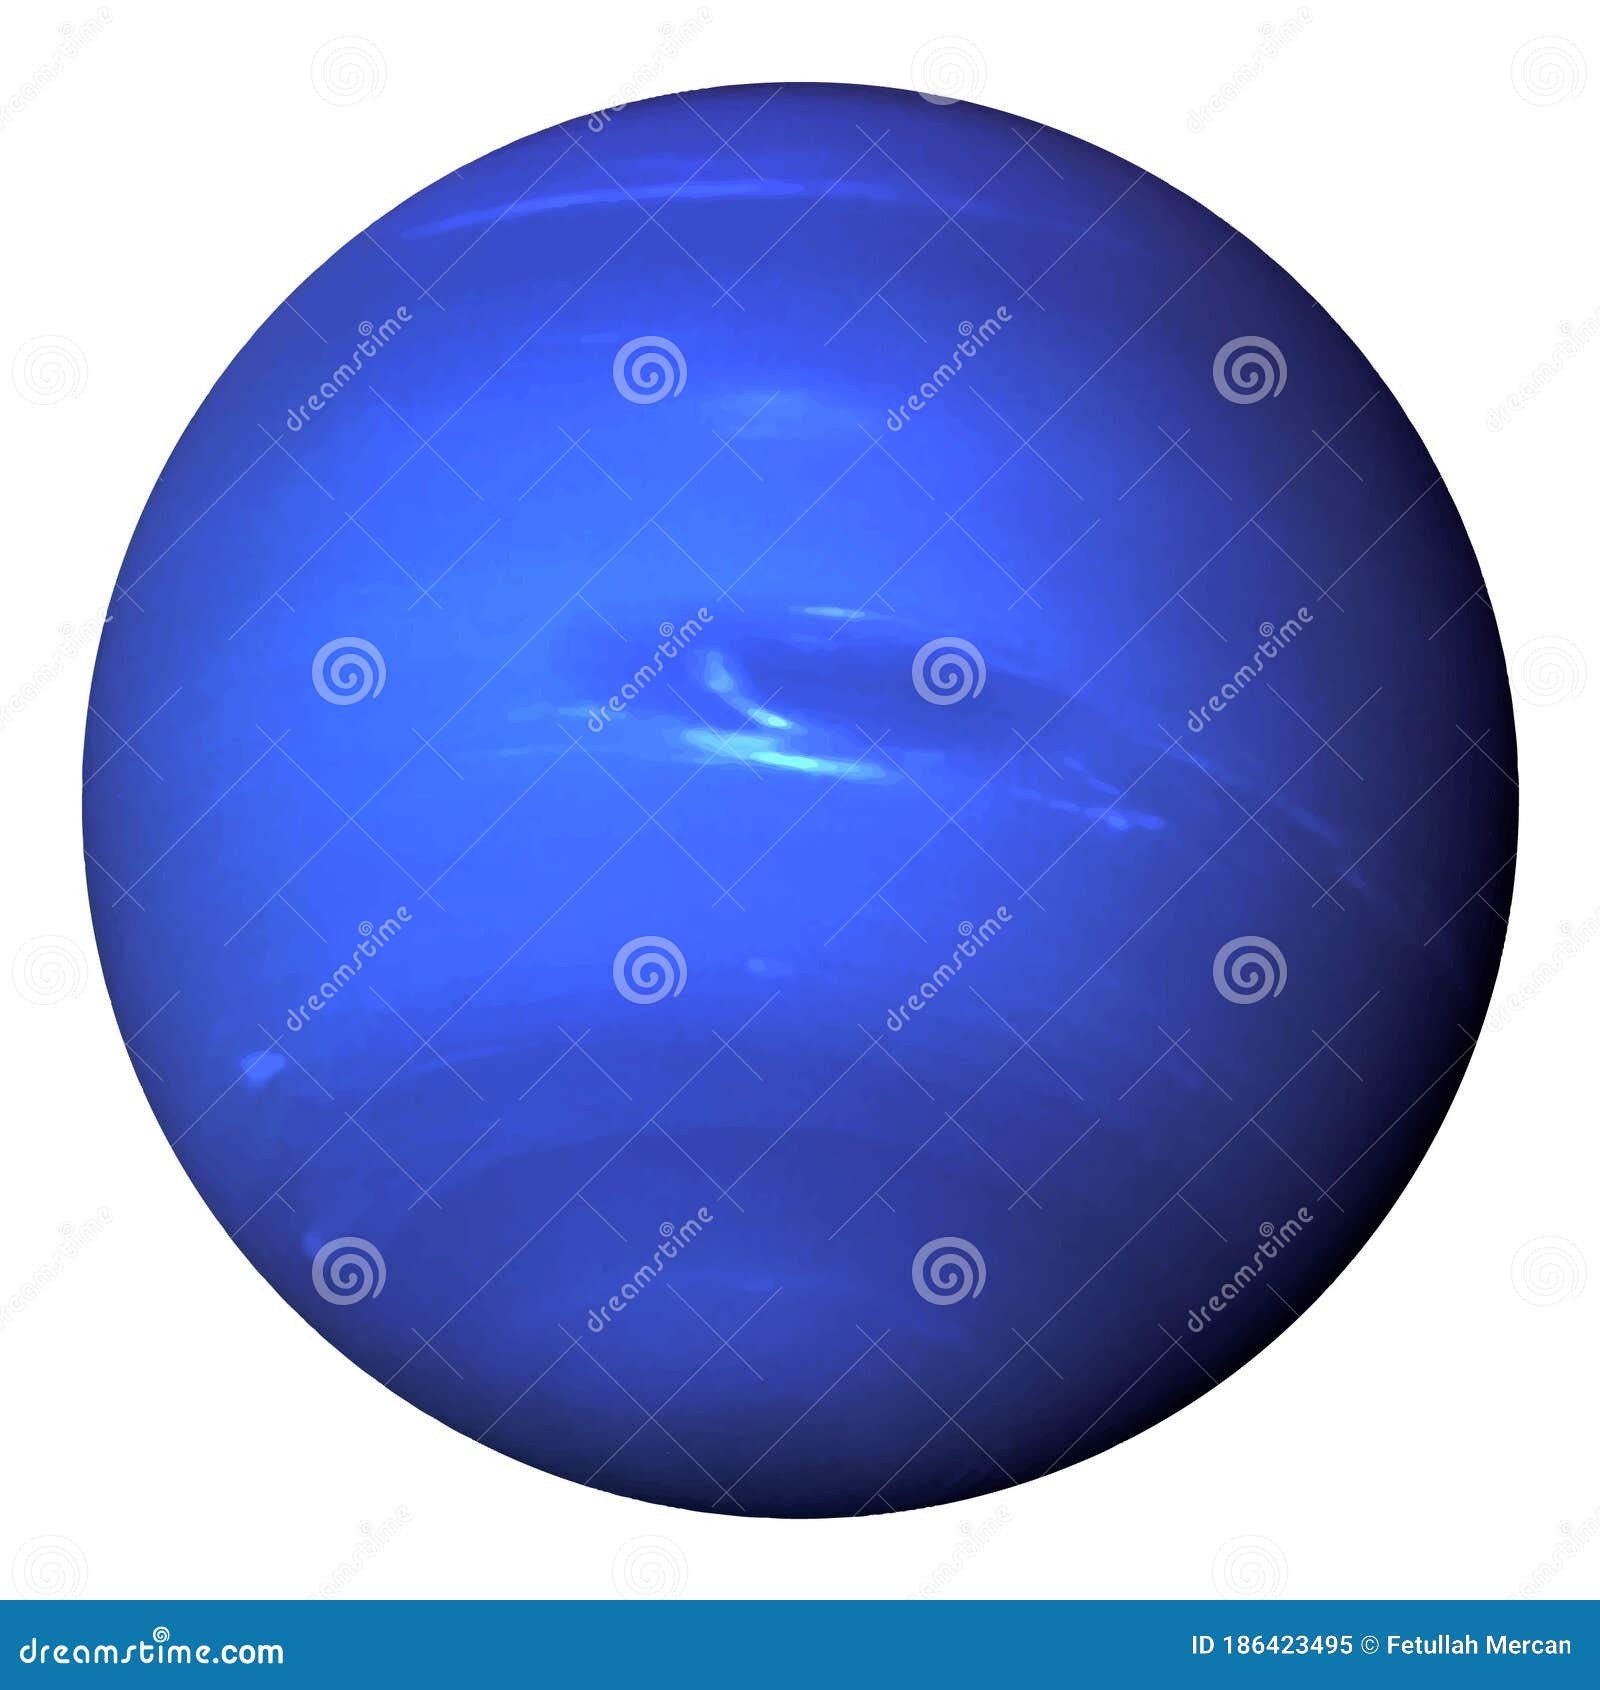 Planet Neptune Isolated on White Background. Realistic Vector ...